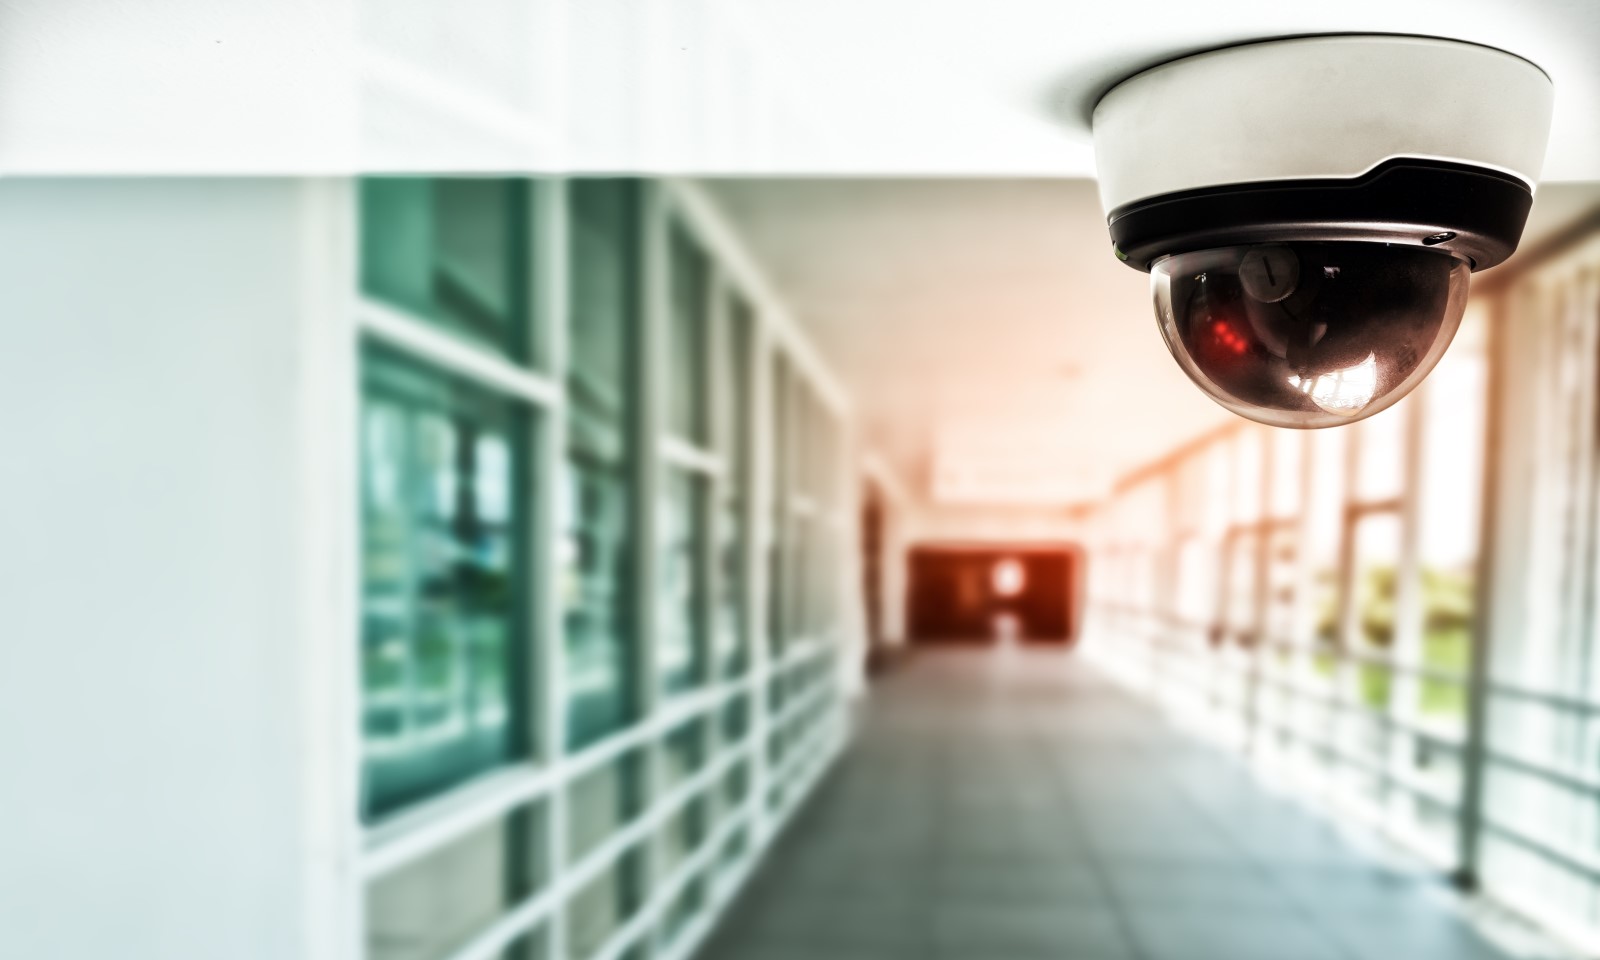 proper video surveillance system planning includes knowing what areas are best served by dome cameras